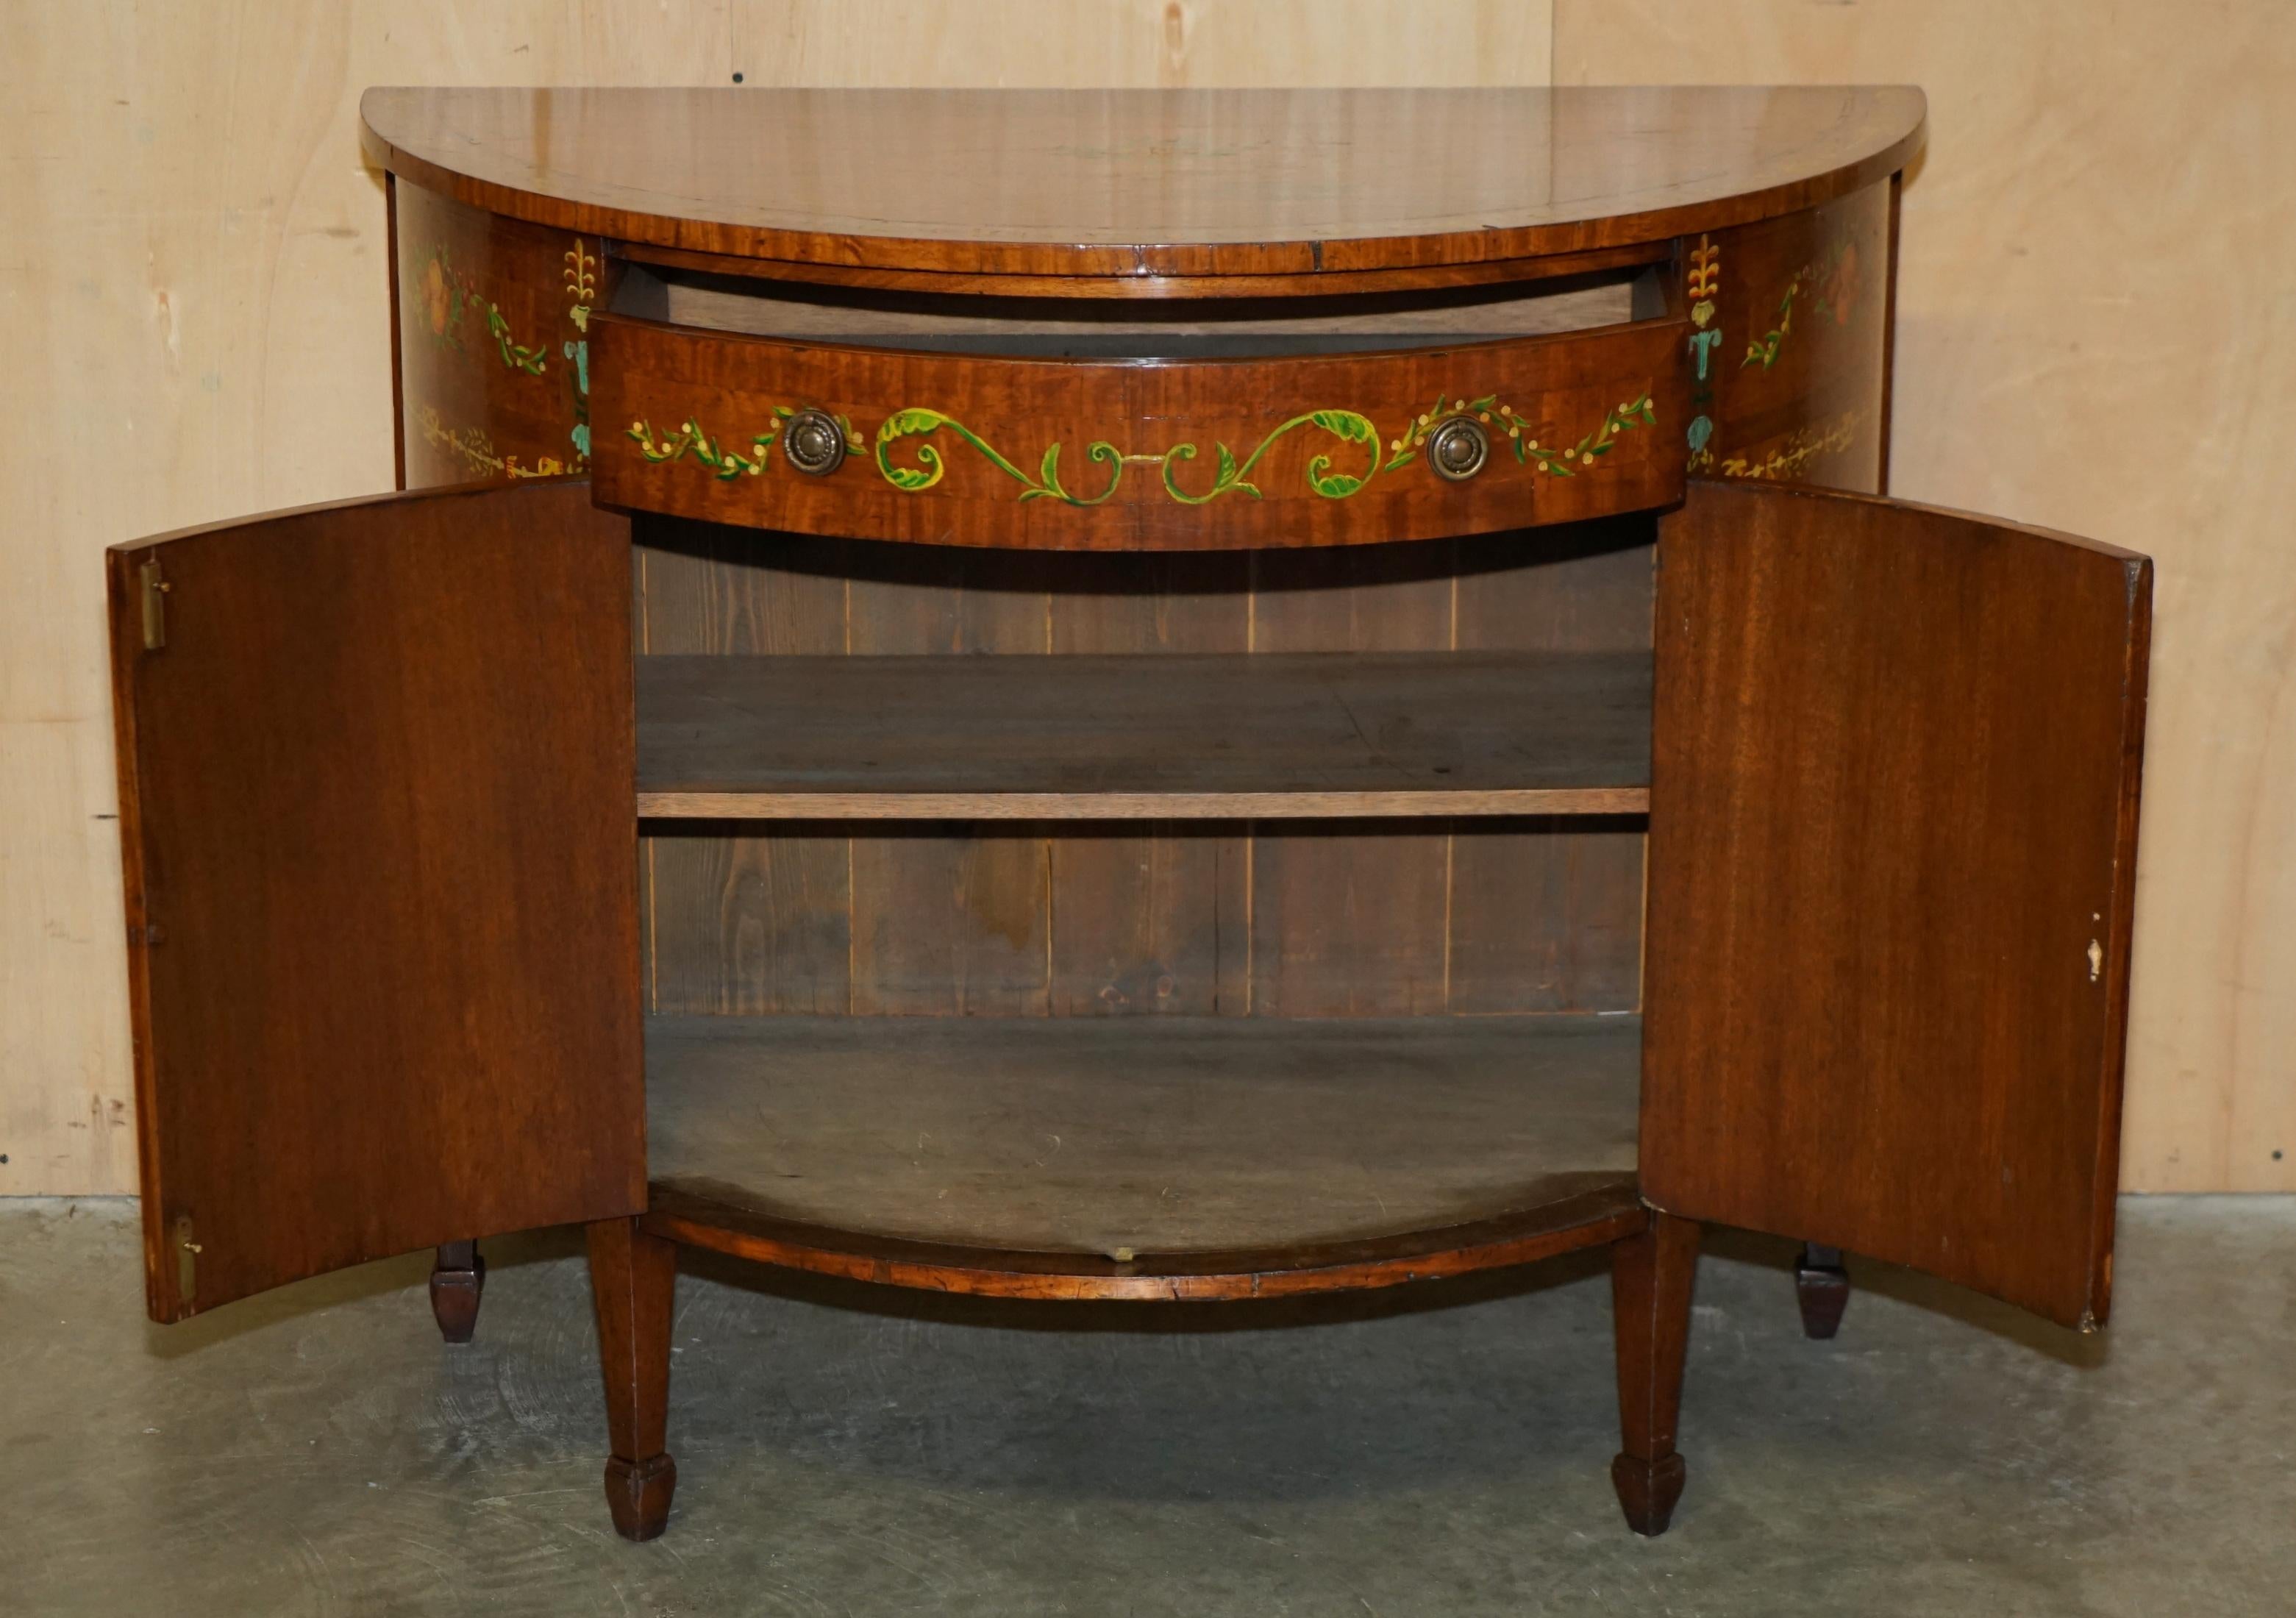 PAIR OF STUNNiNG ANTIQUE ADAMS SHERATON PAINTED DEMI LUNE SIDEBOARD CUPBOARDS For Sale 6